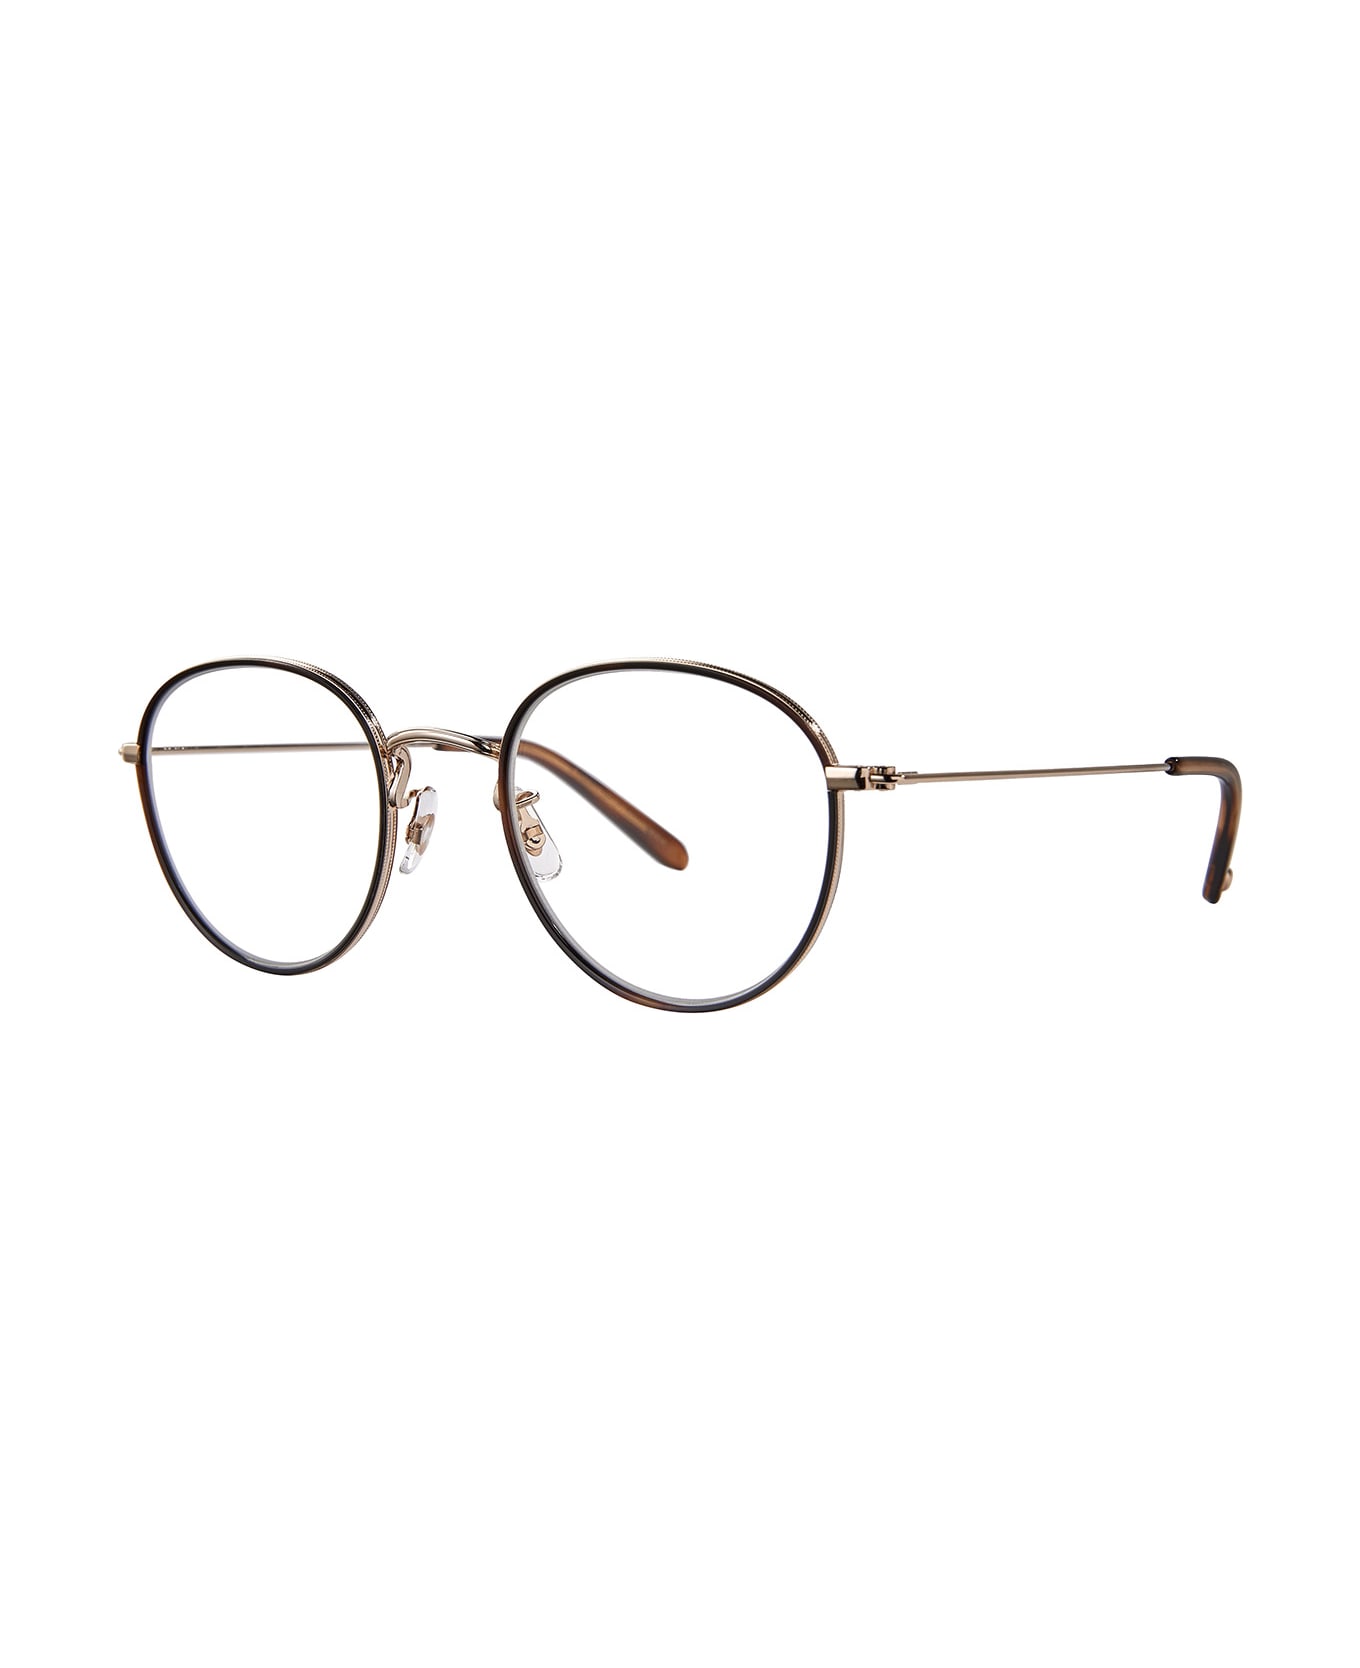 Garrett Leight Paloma Spotted Brown Shell-gold Glasses - At a glance